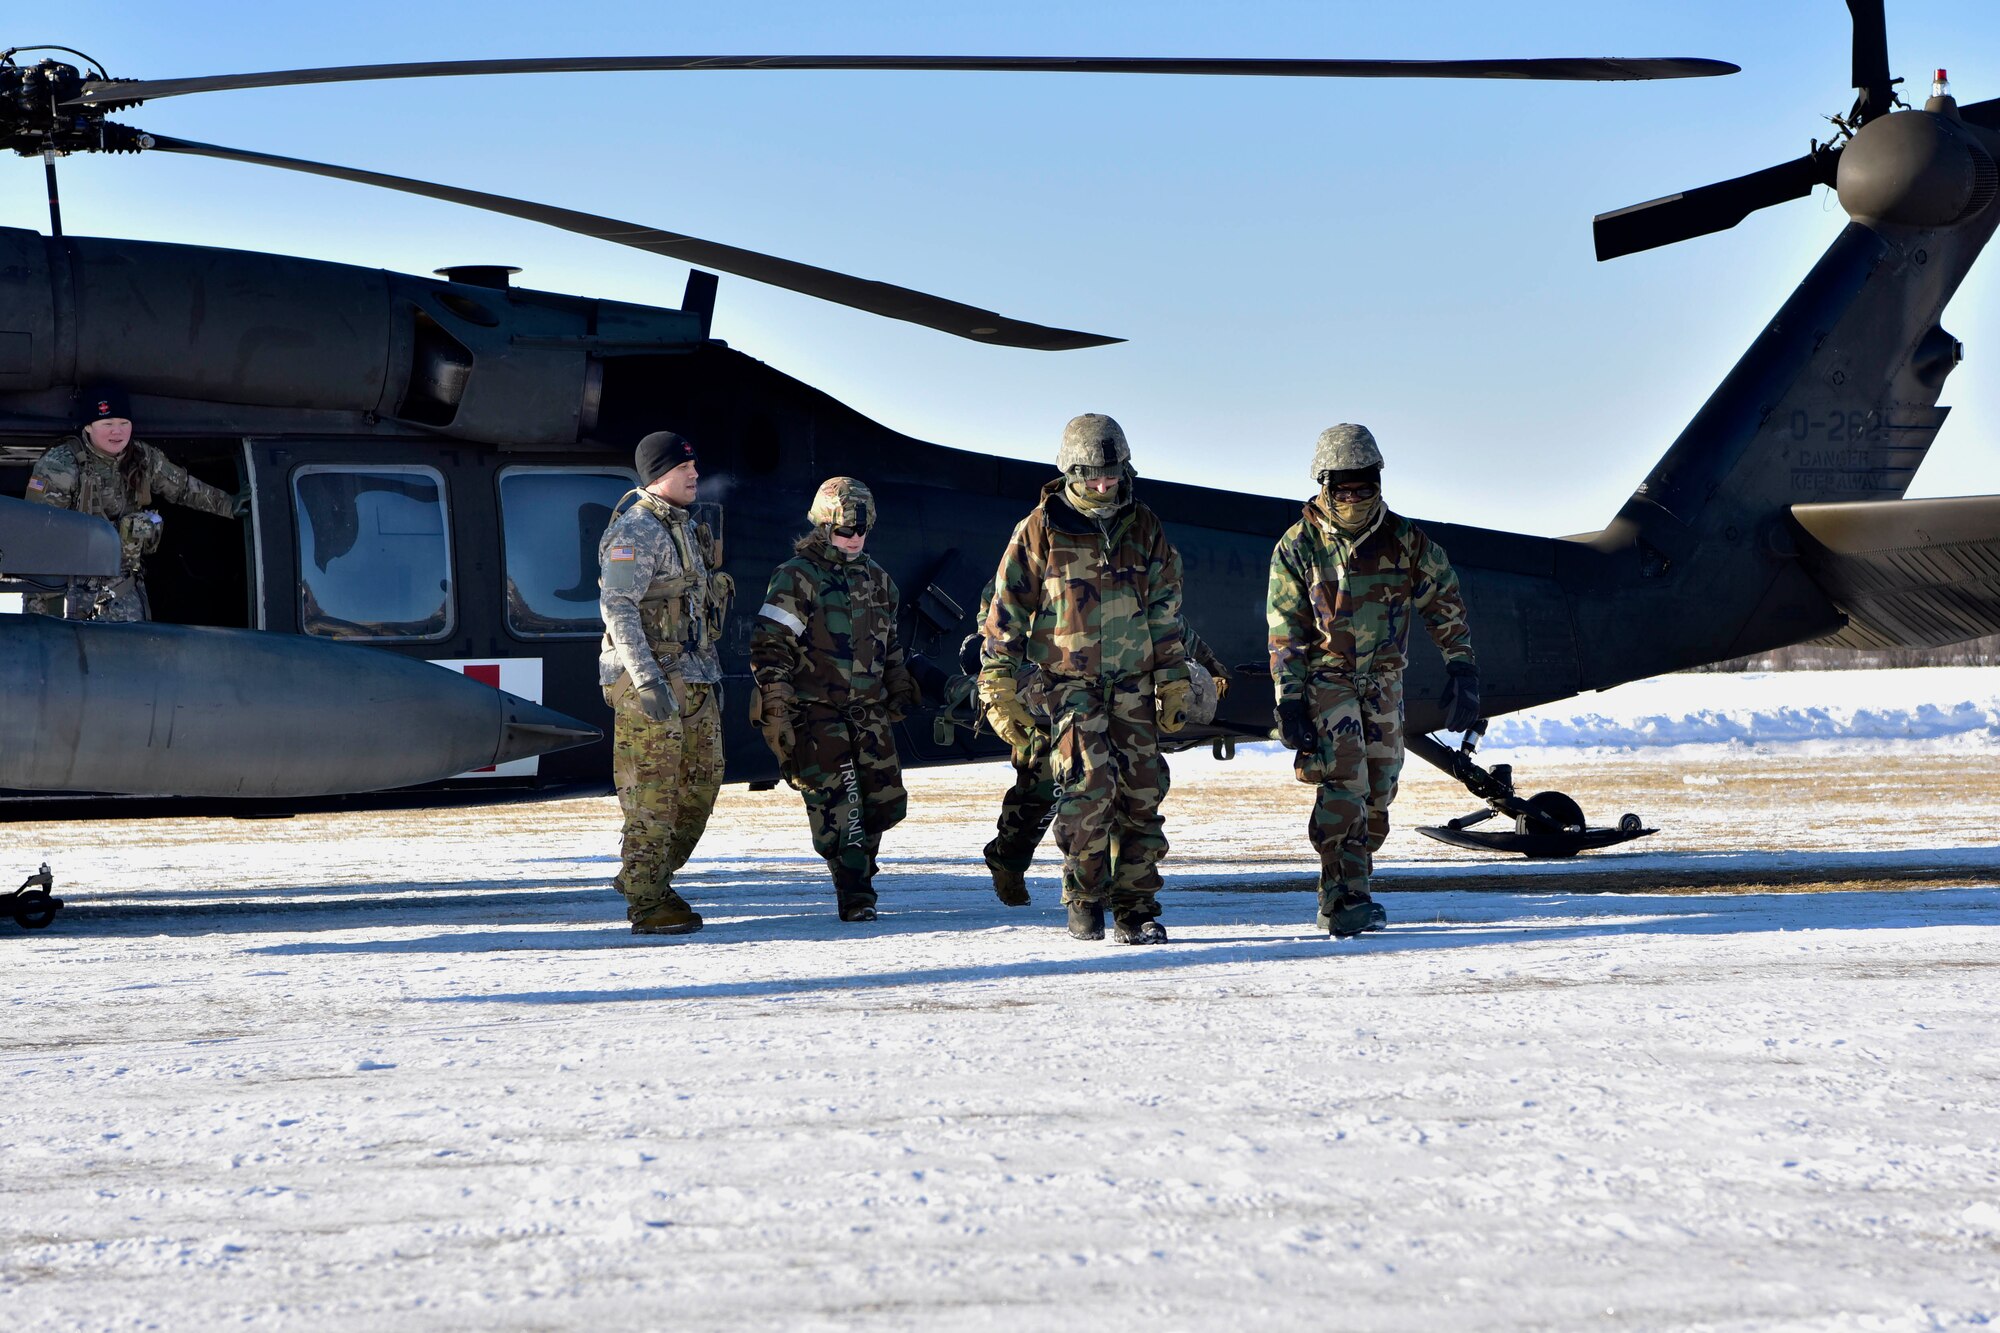 A U.S. Army Soldier teaches 354th Security Forces Squadron (SFS) defenders how to properly remove a casualty from a UH-60 Blackhawk during a medical evacuation (MEDEVAC) exercise on Eielson Air Force Base, Alaska, Feb. 26, 2020. The 354th SFS partnered with 1-52D General Support Aviation Battalion to be able to simulate a real world MEDEVAC. (U.S. Air Force photo by Senior Airman Beaux Hebert)